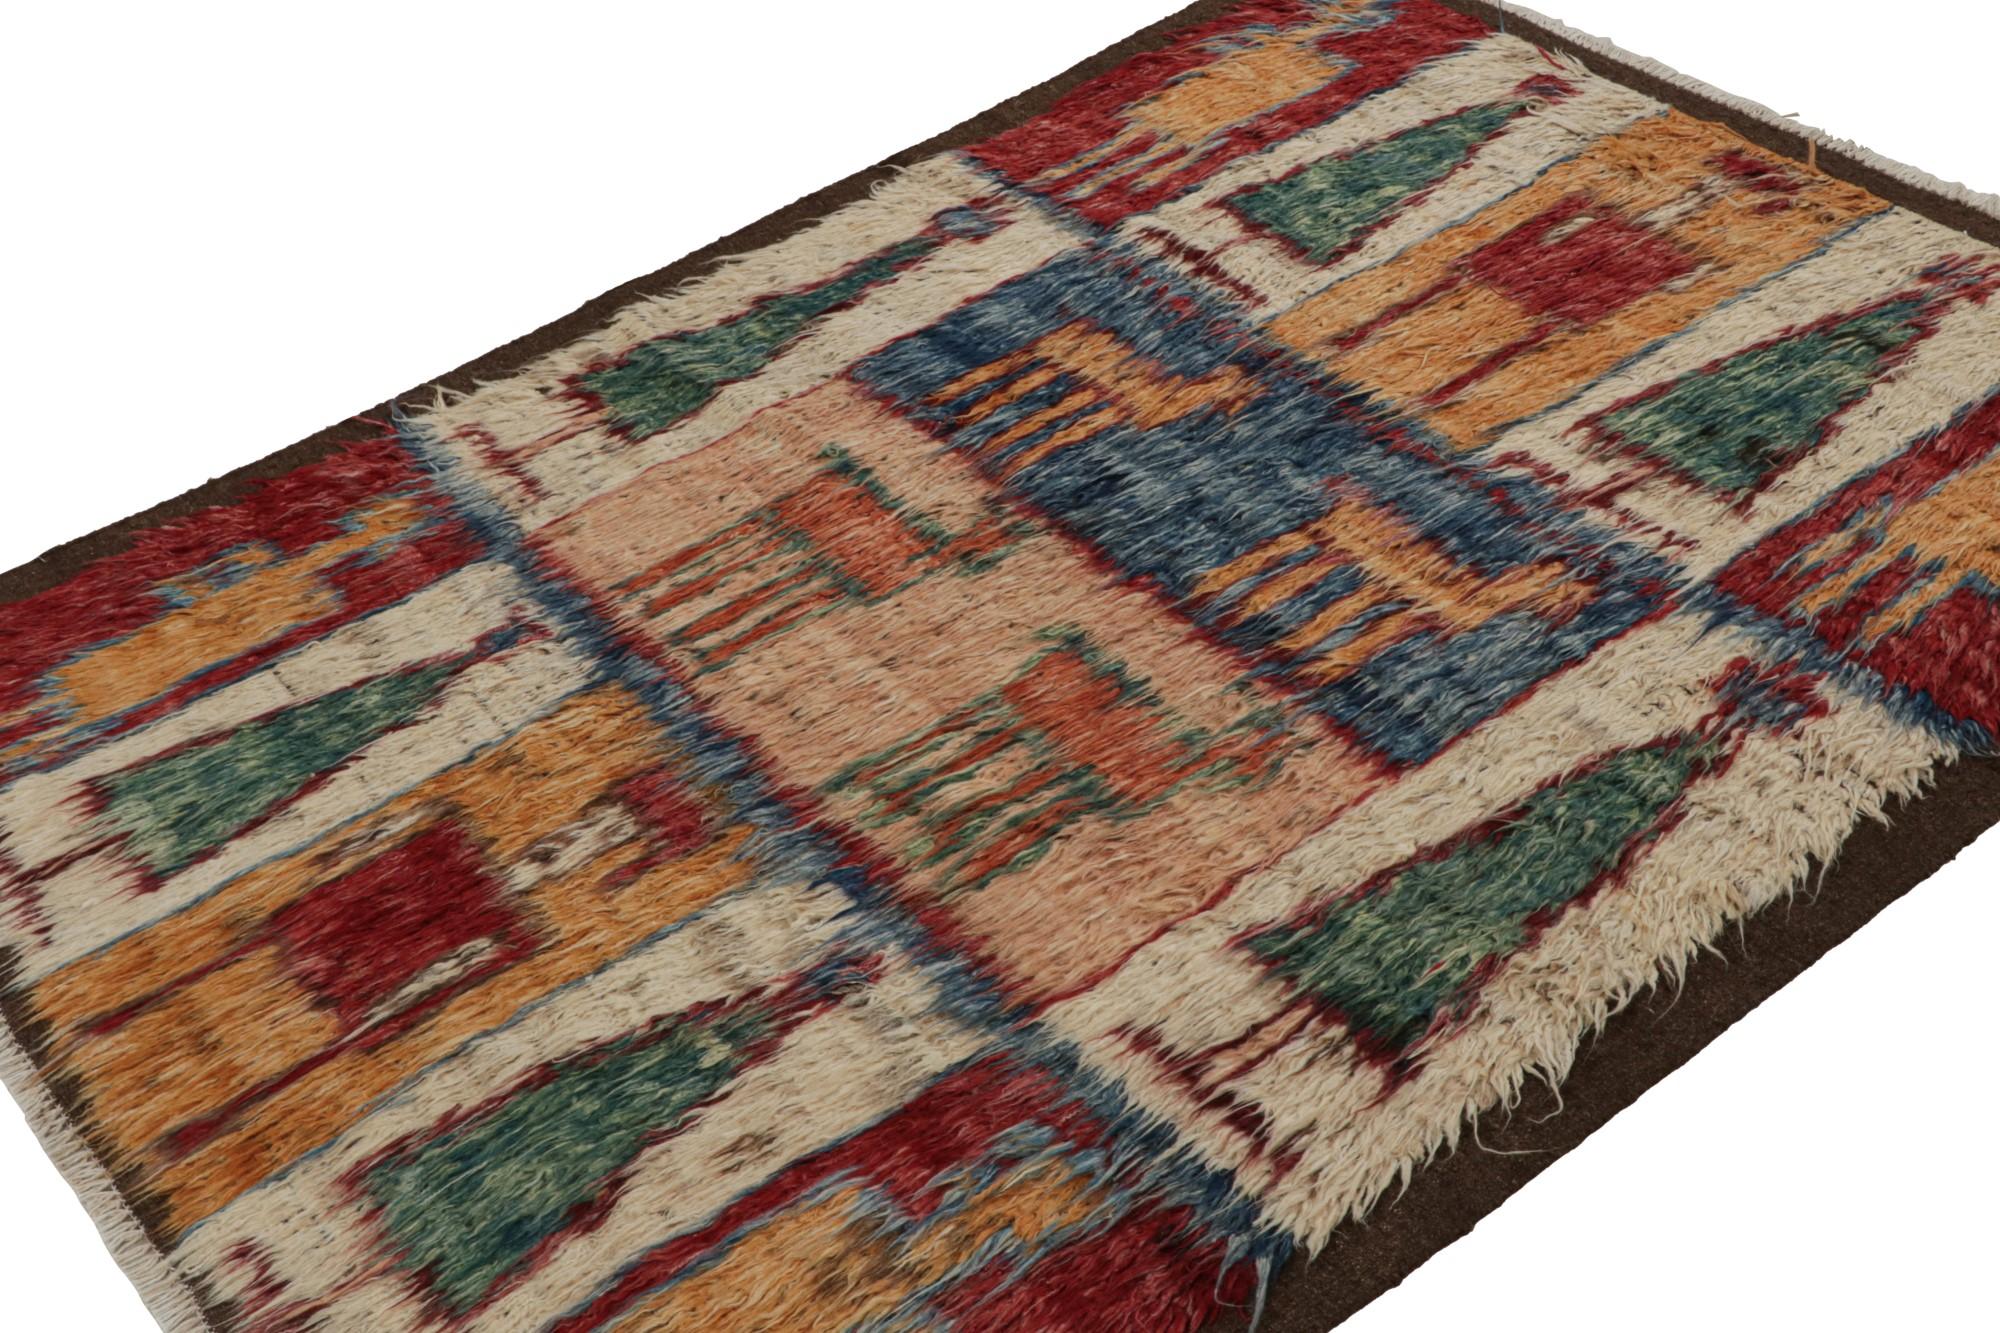 Hand-knotted in wool, this 6x7 Moroccan flatweave rug made by our partners in India, features pictorial depictions of animals and humans with a vibrant color play of red, green, gold and beige/brown tones. 

On the Design: 

Rug & Kilim presents an